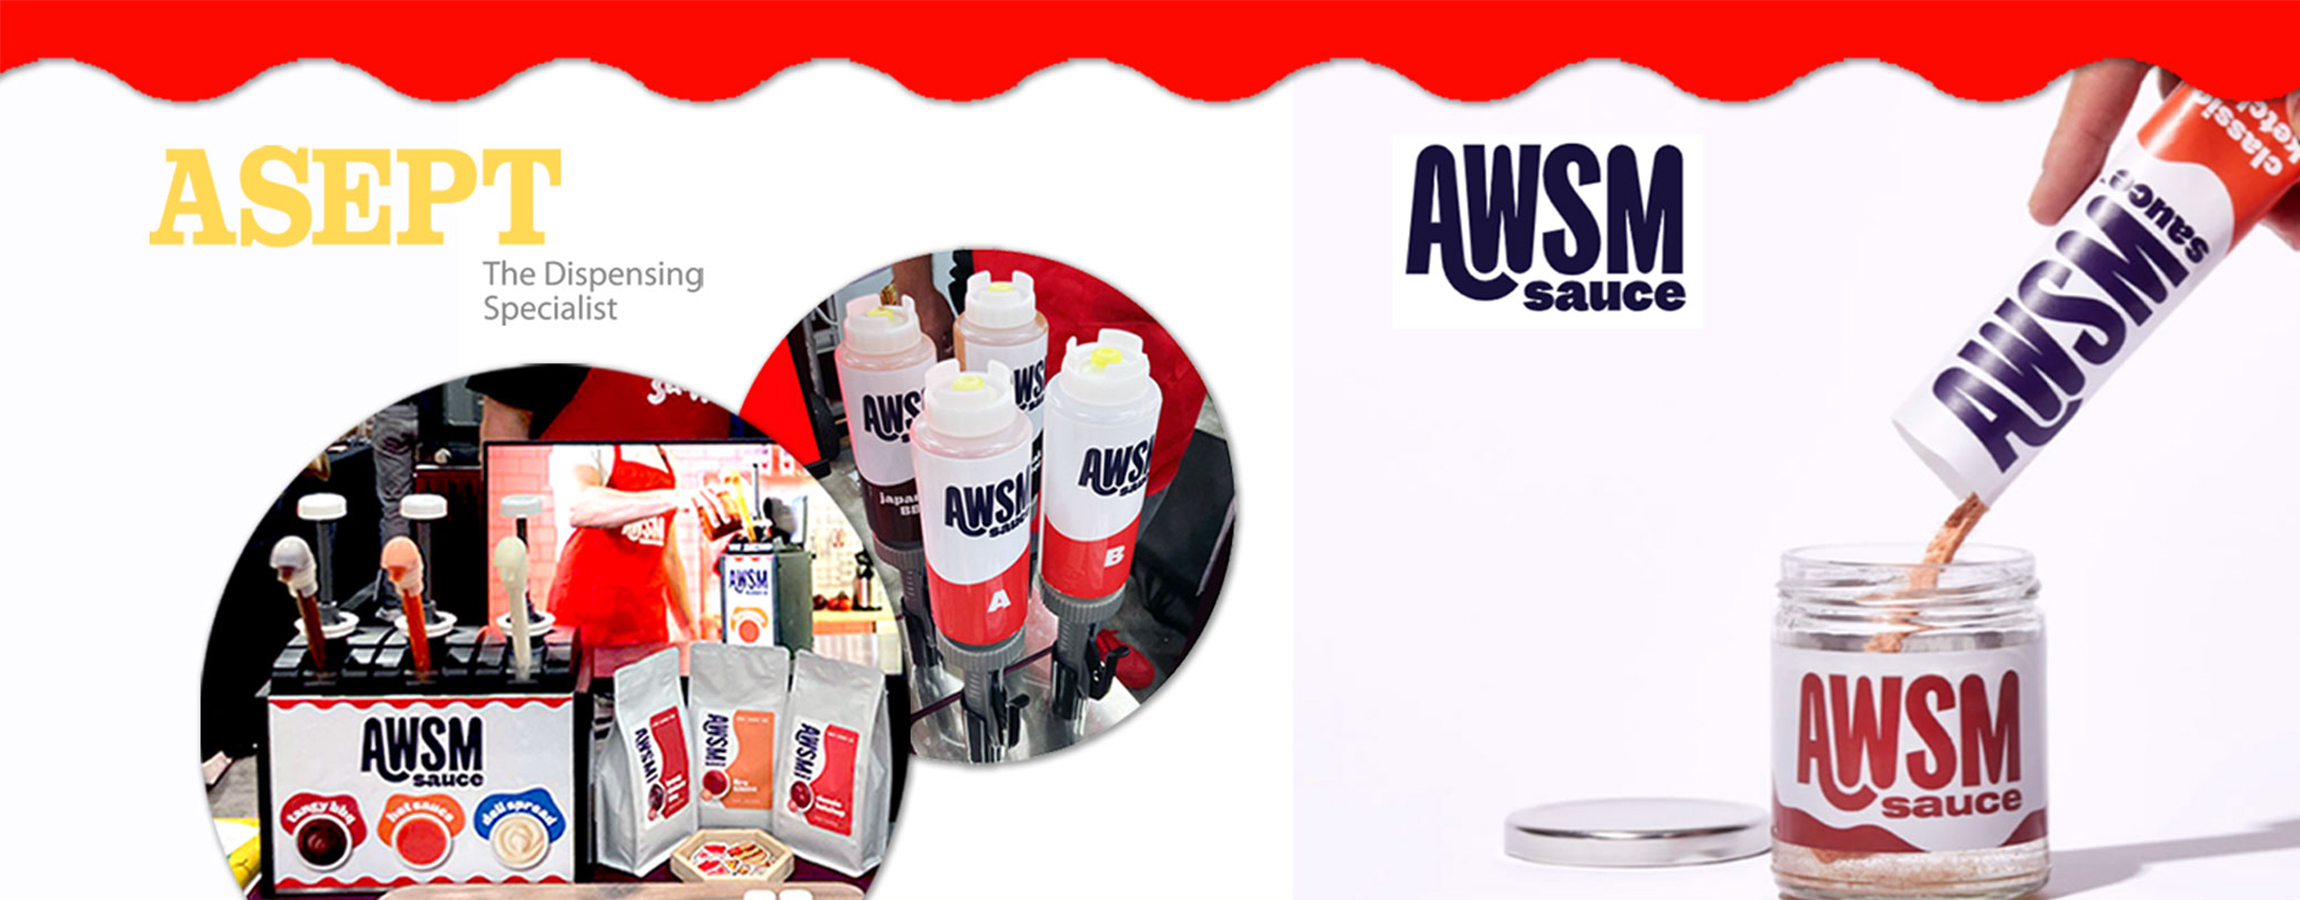 AWSM and ASEPT collaboration dispensers and sauces